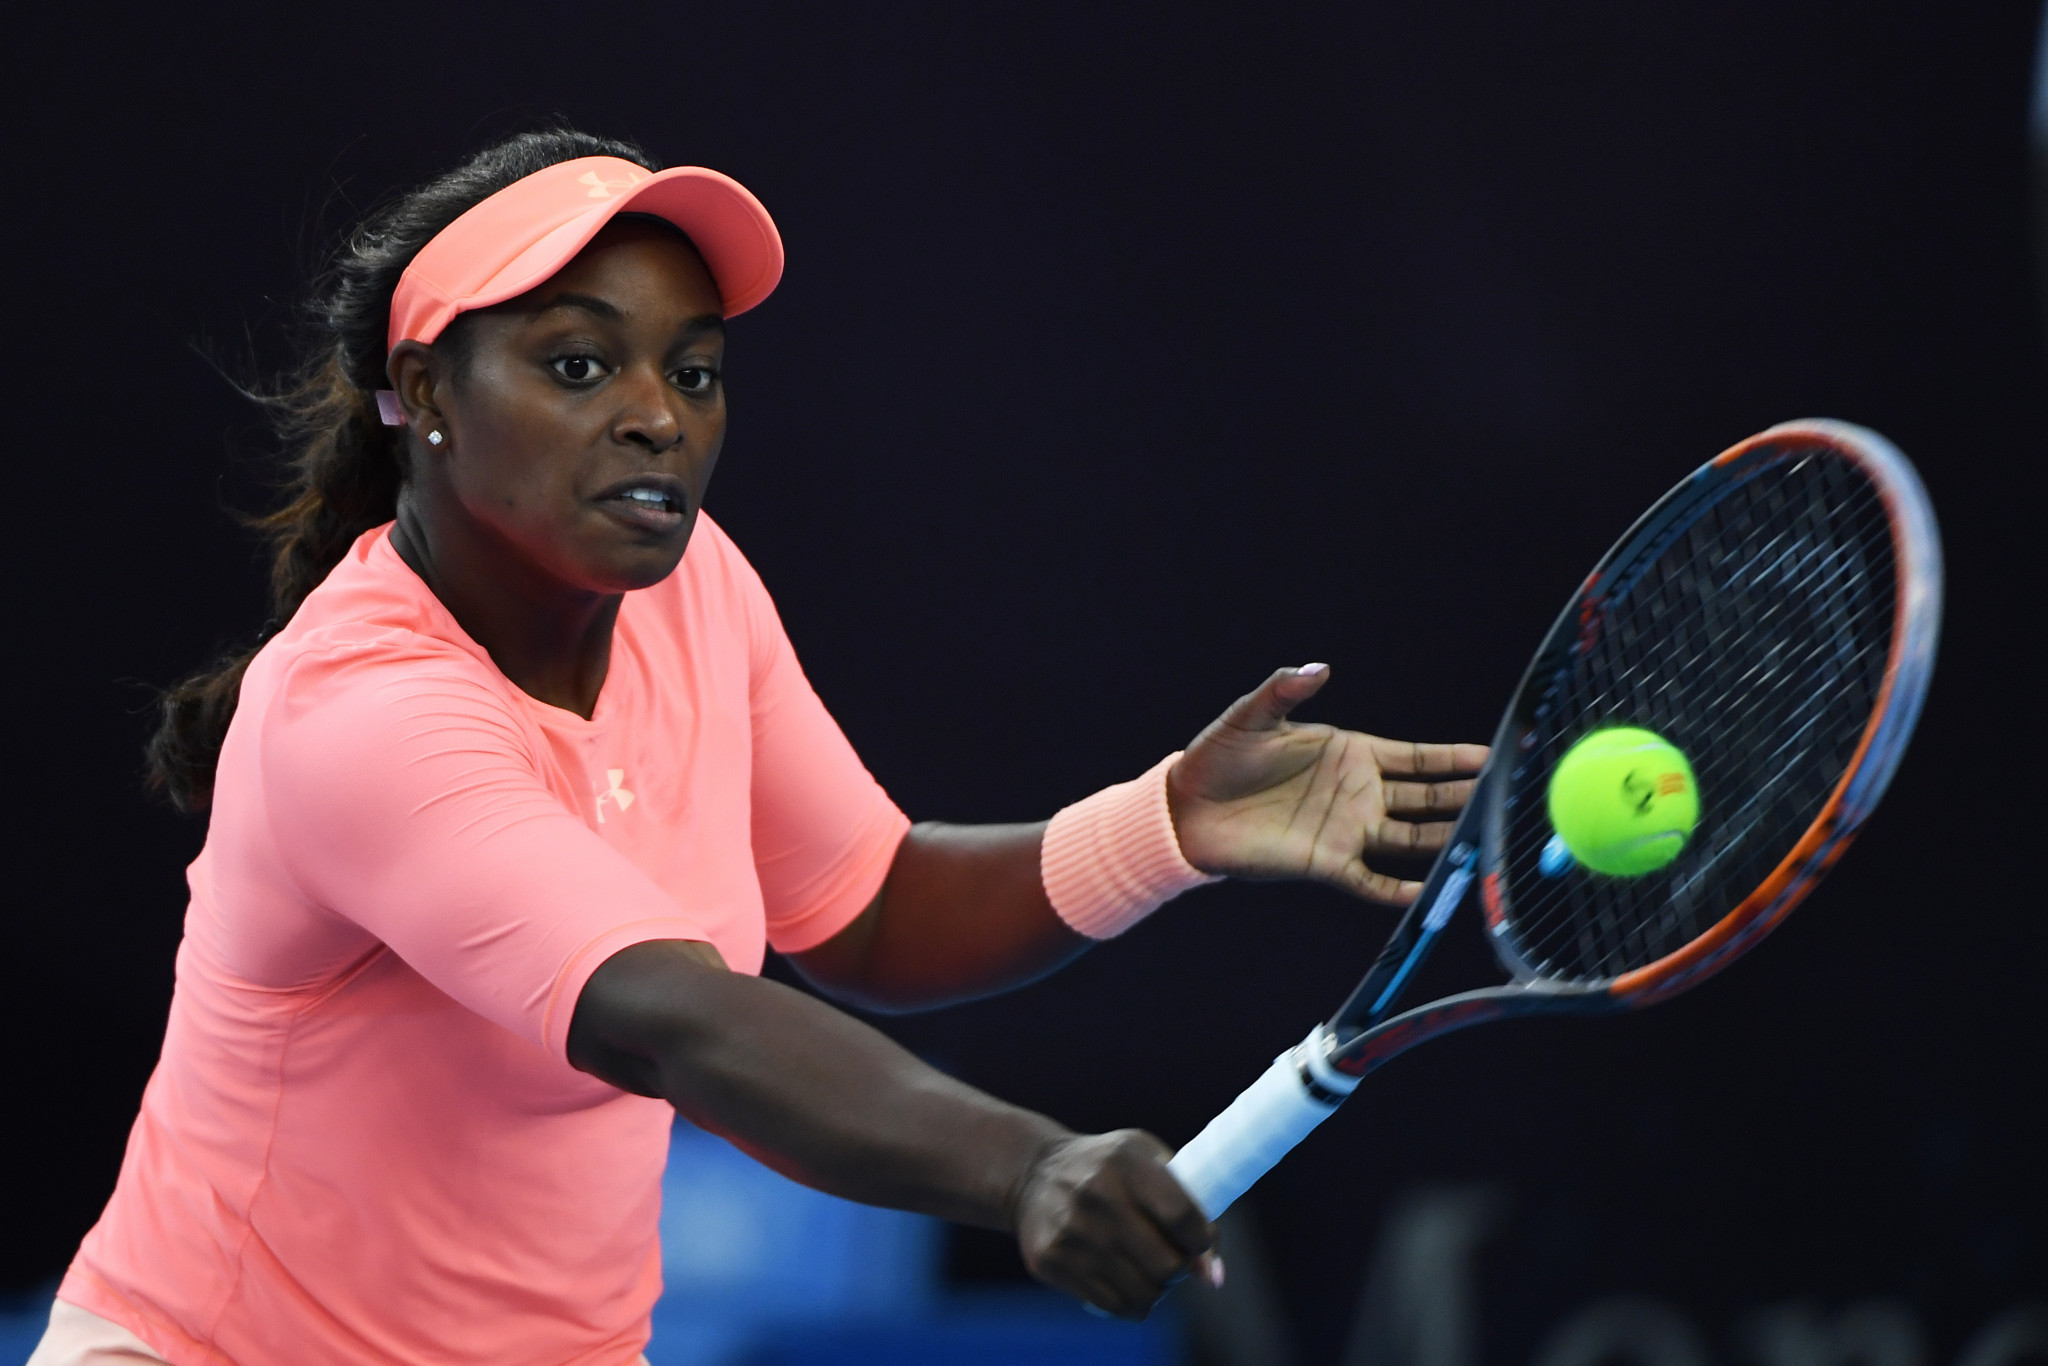 US Open winner Sloane Stephens also lost at the first round stage ©Getty Images